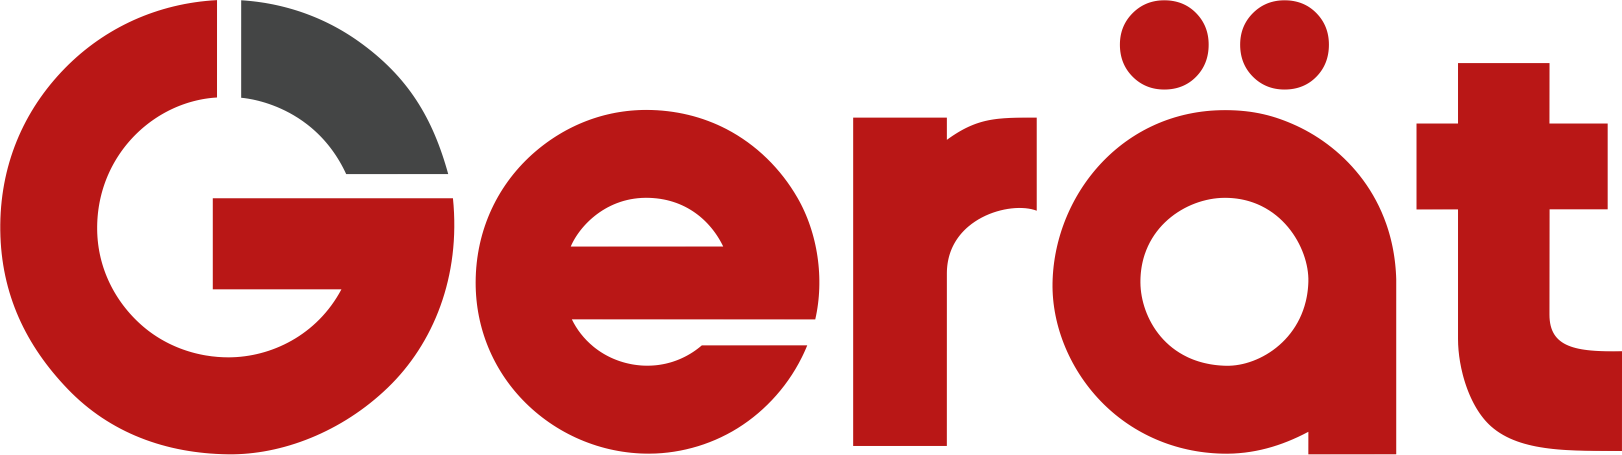 Gerat-autoparts-red-png.png